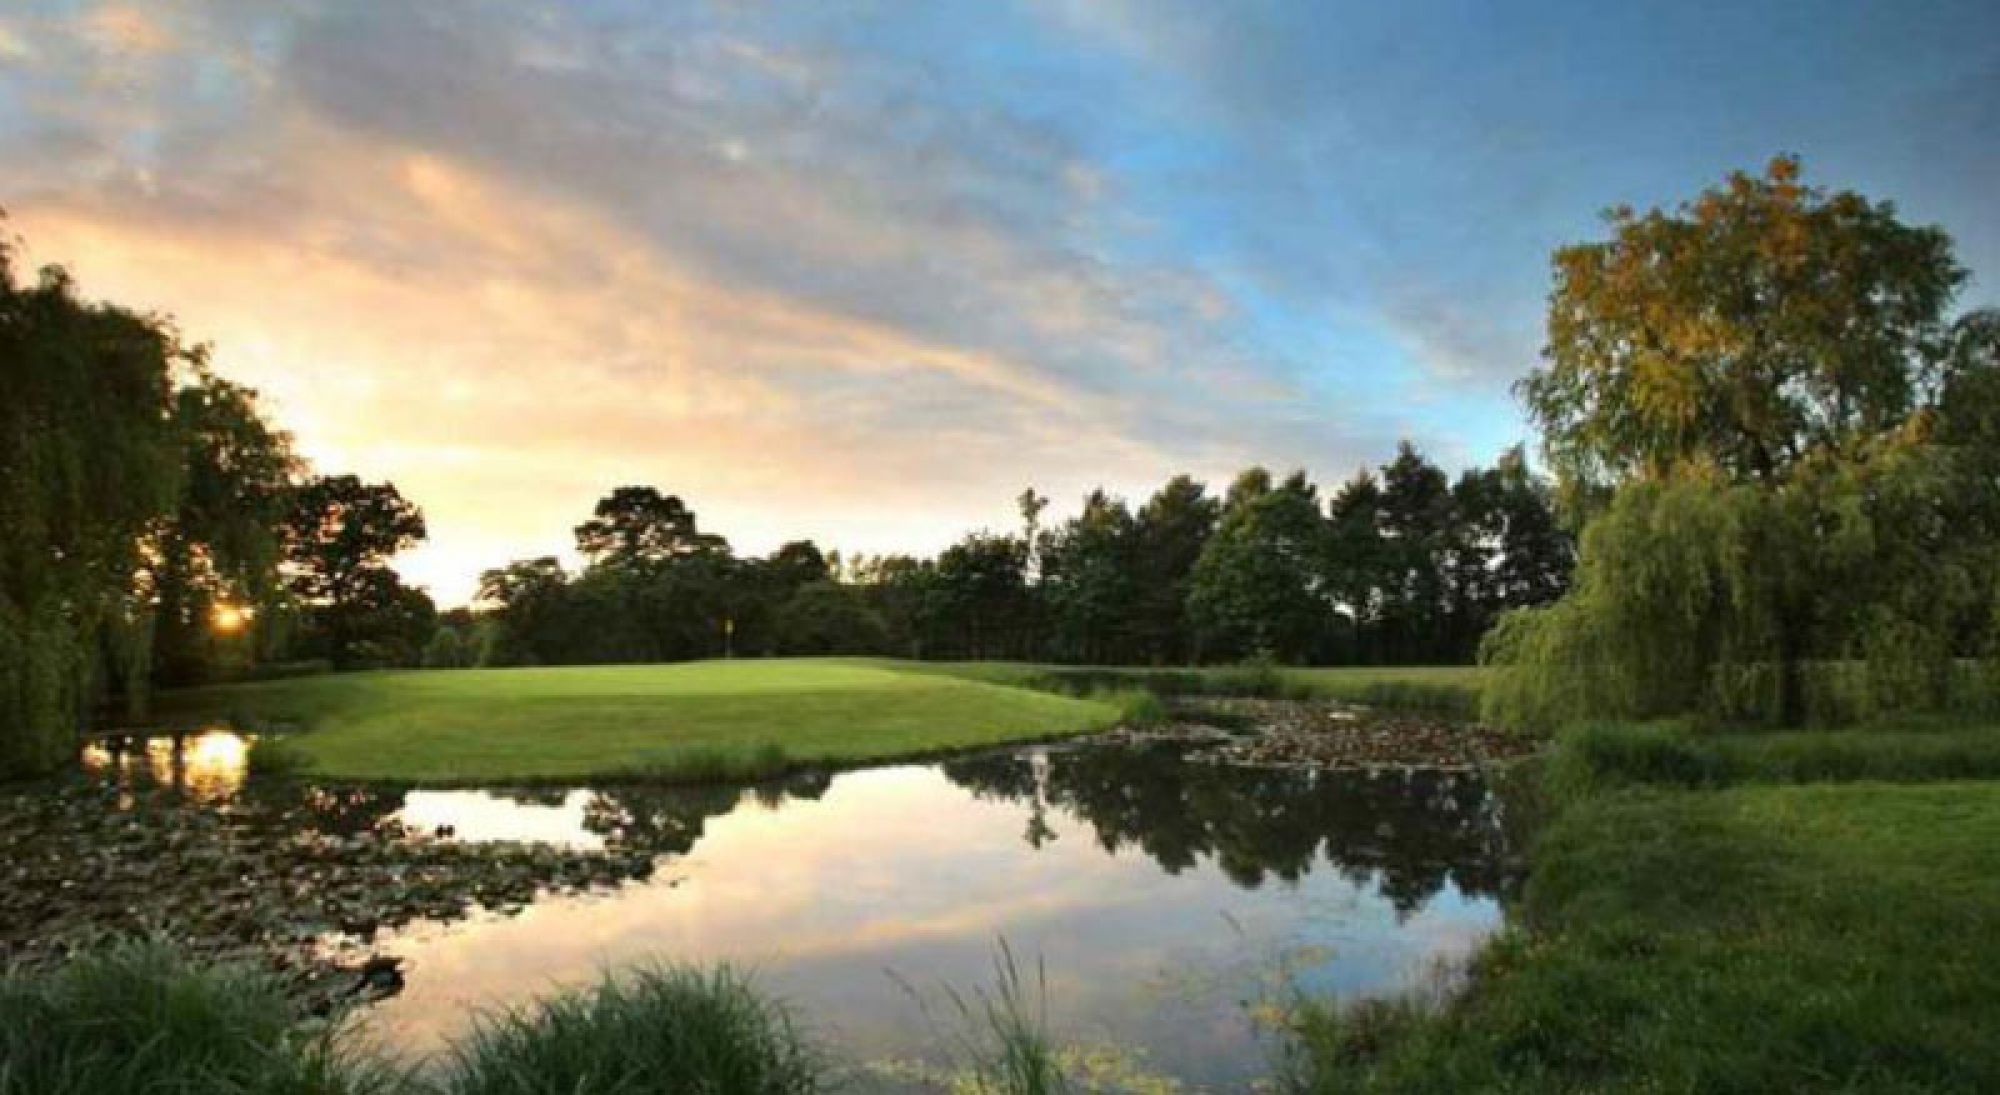 All The Meon Valley Country Club's beautiful golf course situated in vibrant Hampshire.